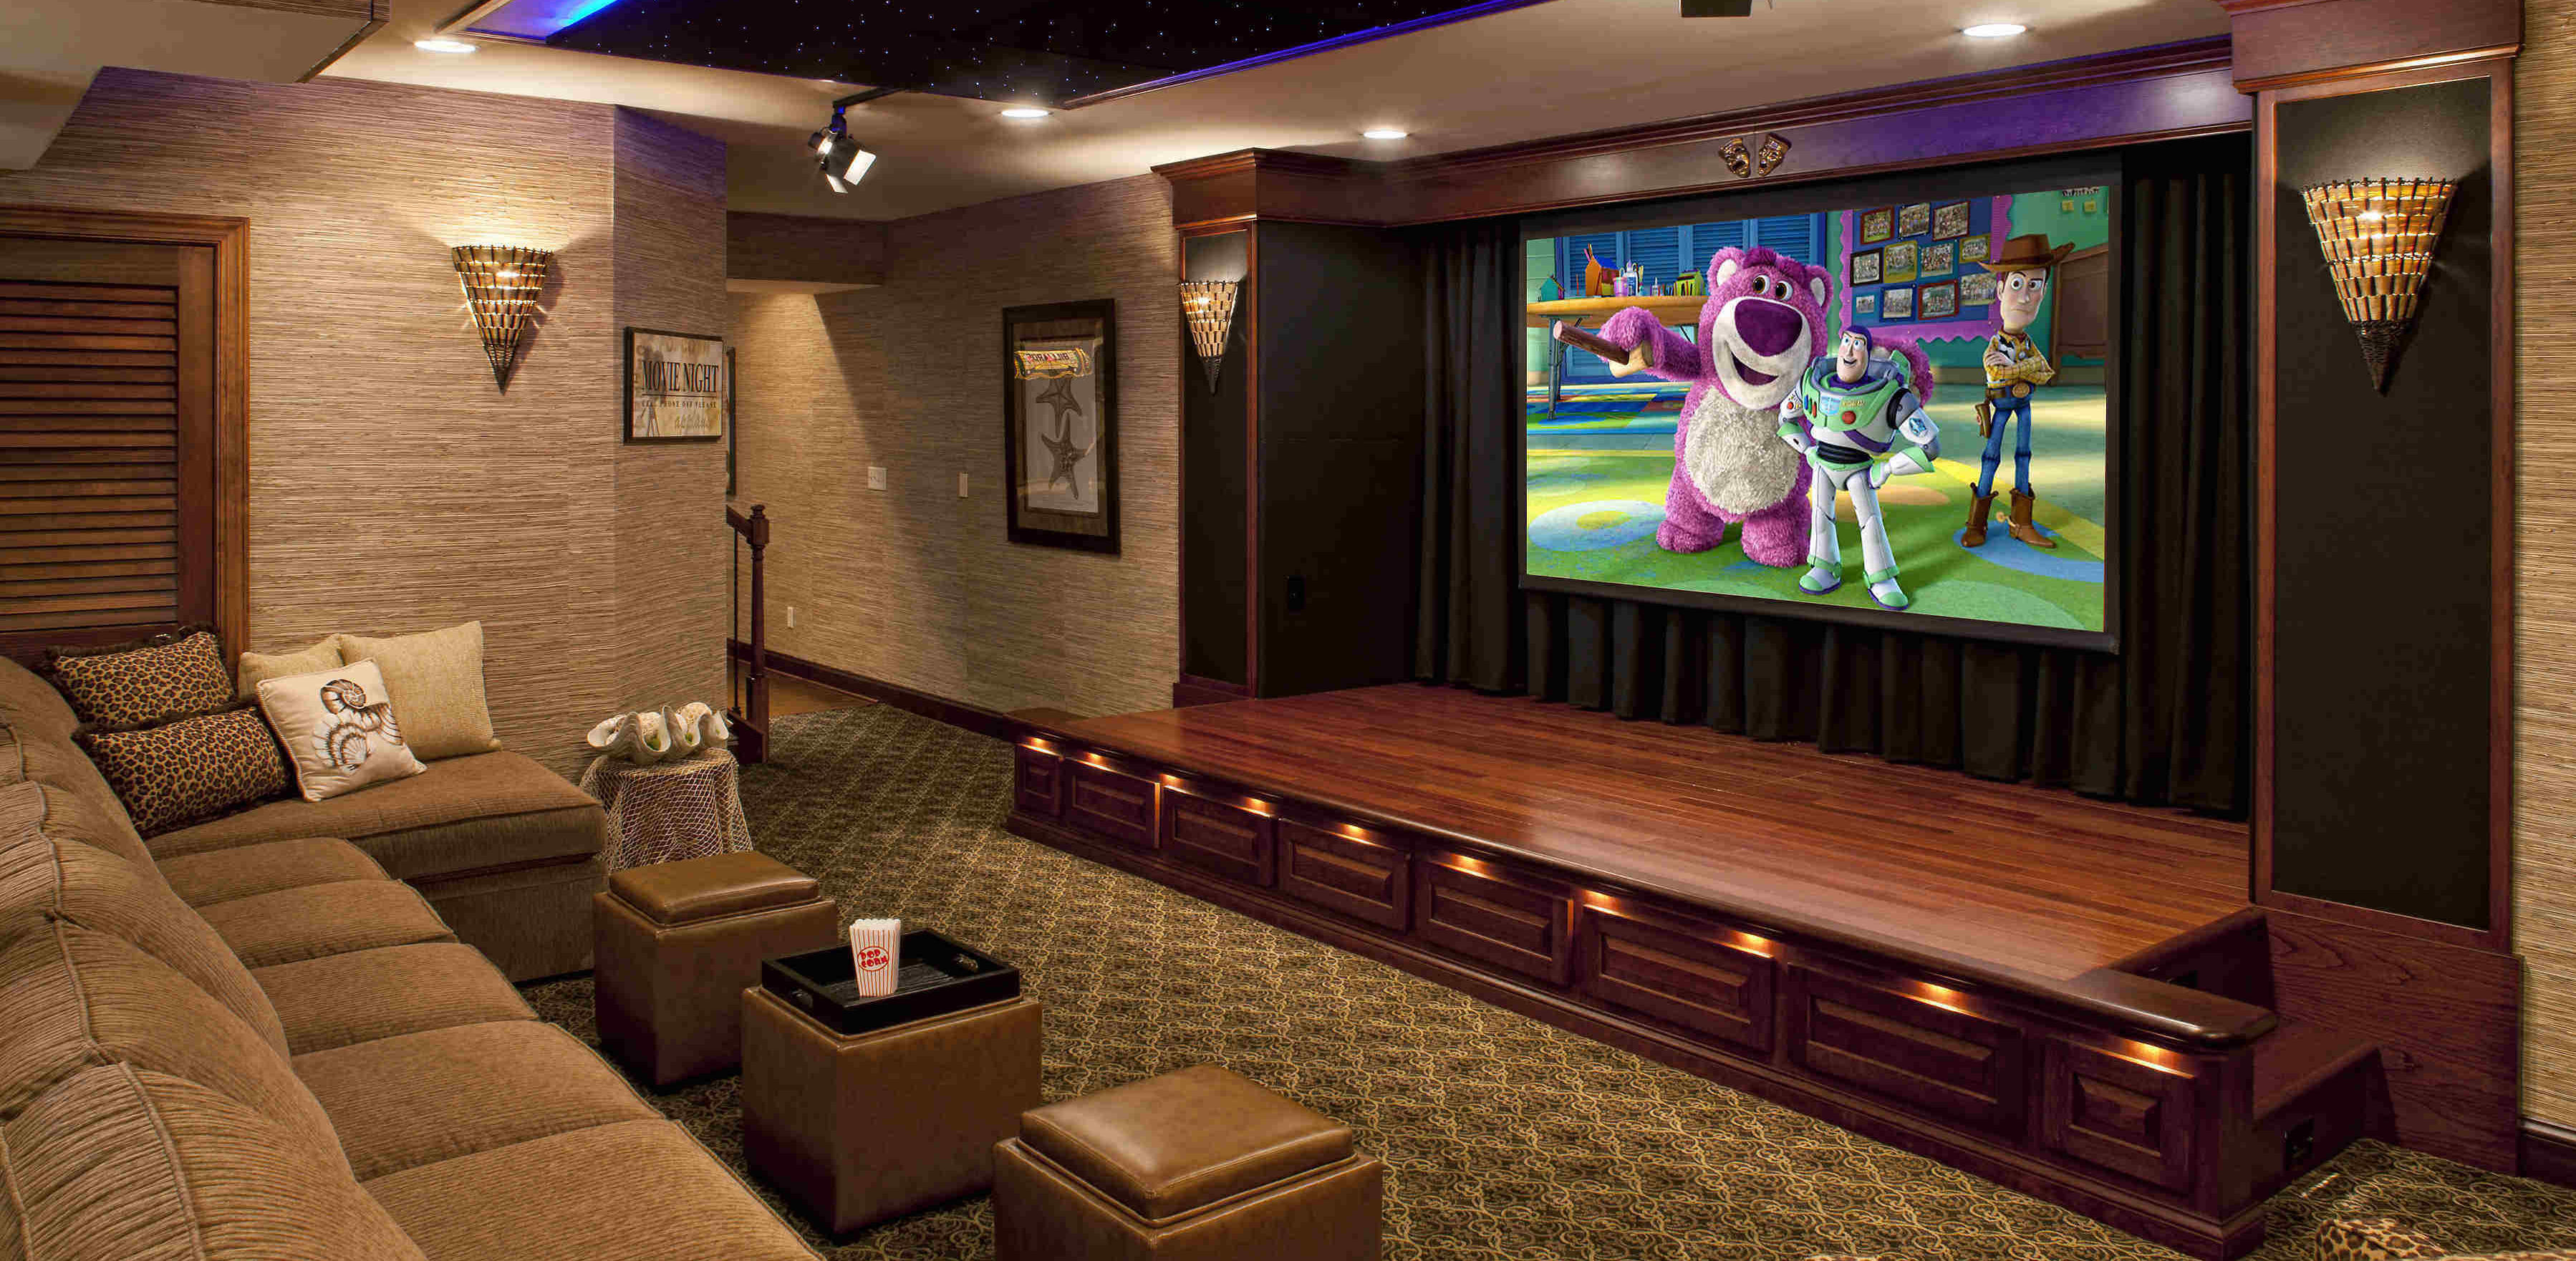 Home Theater Installation Cost Guide and Useful Tips ...